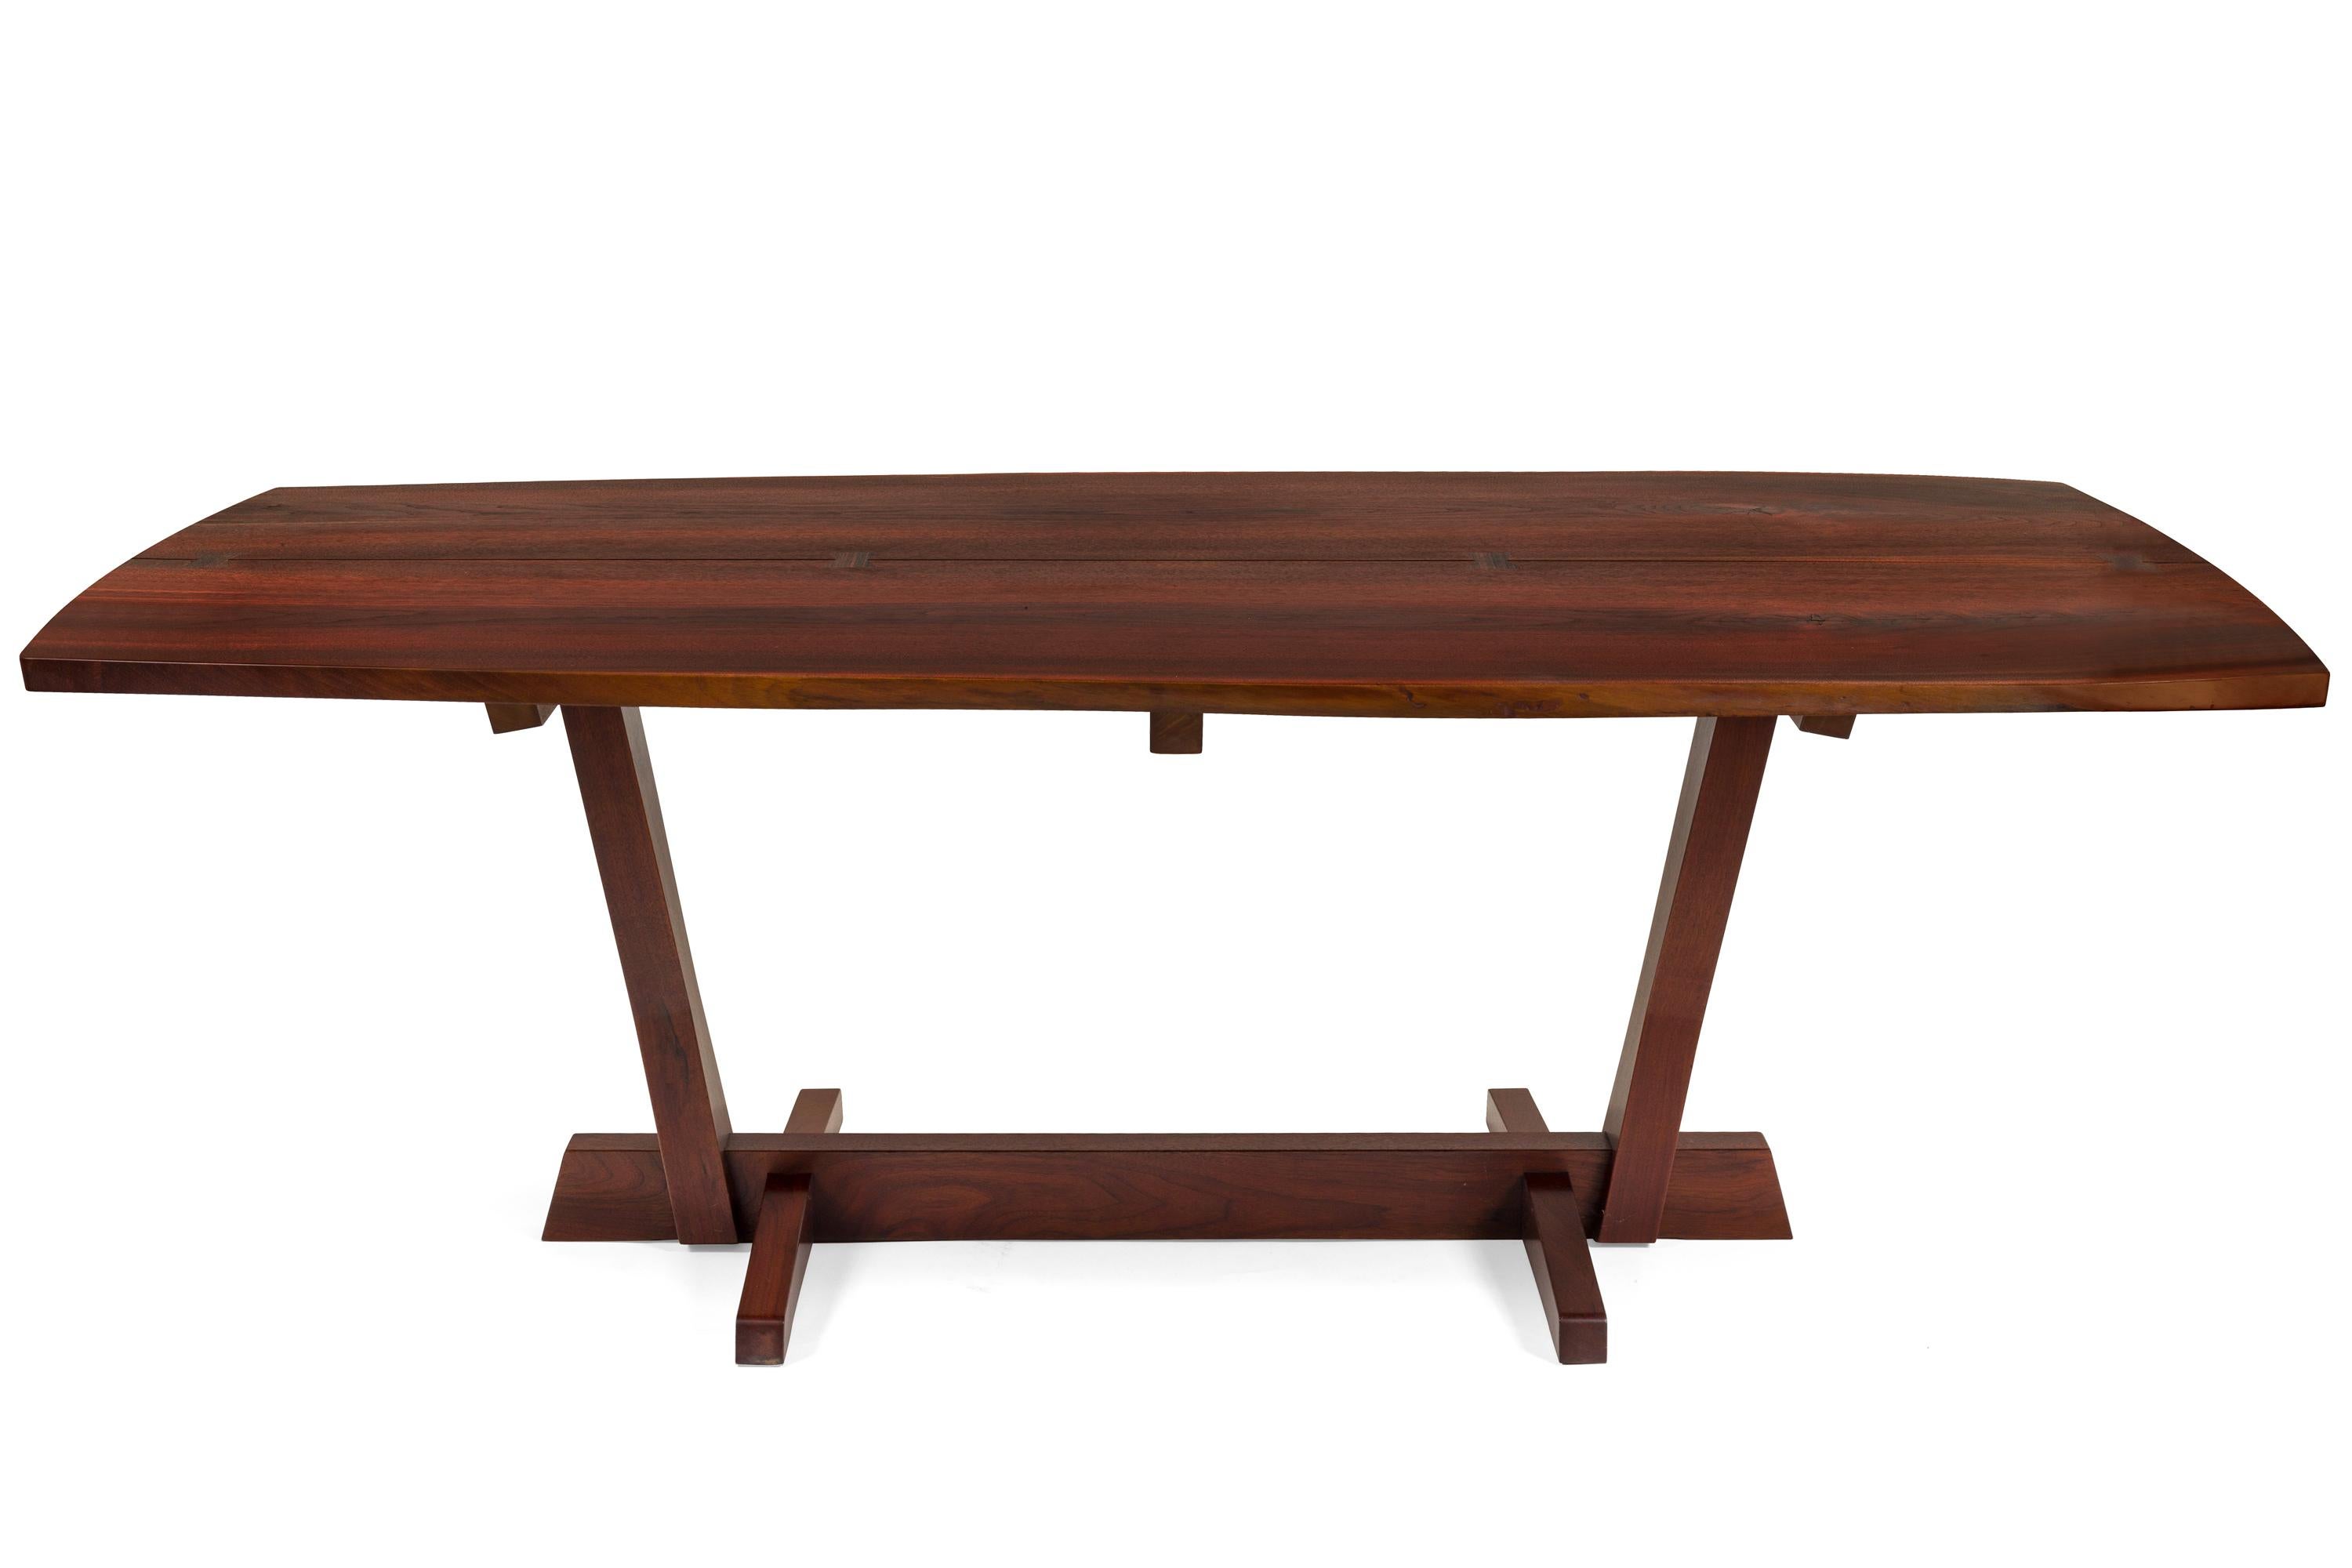 Inspired by the completion of the Conoid Studio in 1959 this dining table is one of the most desirable models that Nakashima produced. A pleasing somewhat irregular shape that defines Nakashima's desire to take advantage of the beauty of the